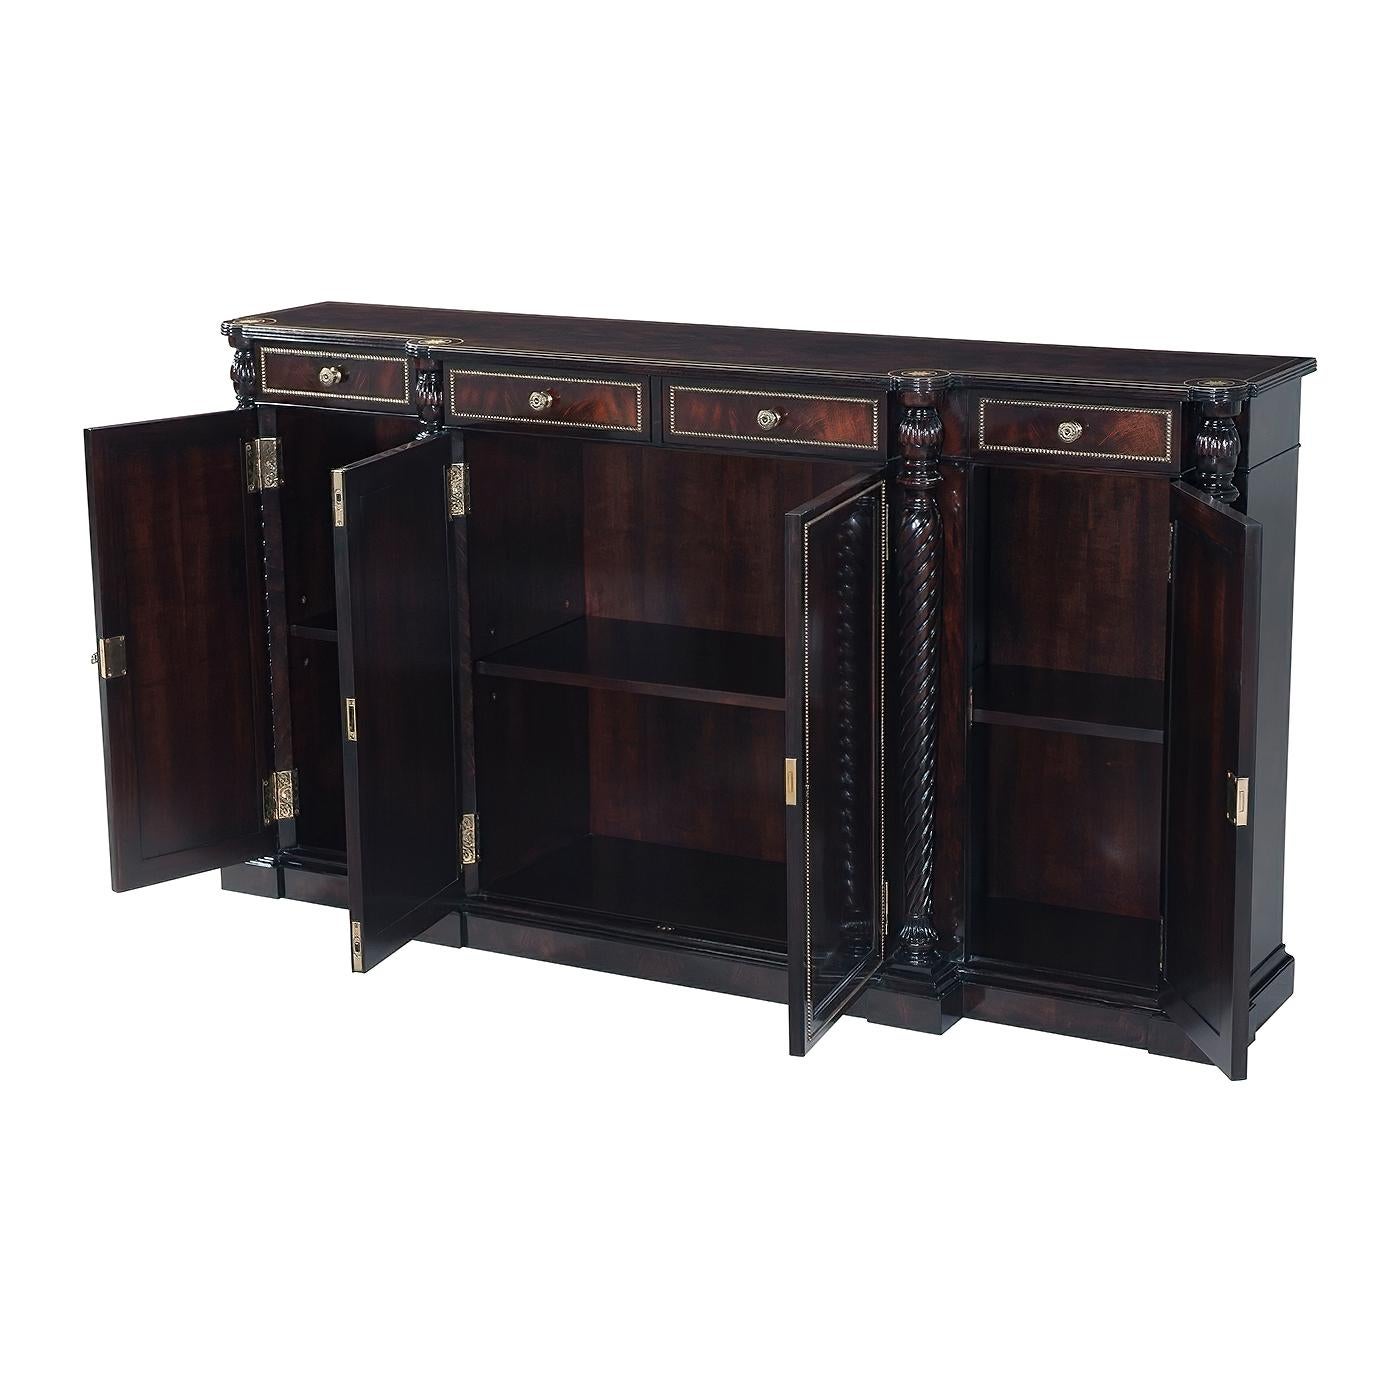 A Regency style ebonized flame mahogany buffet, the breakfront top with a reeded edge, brass stringing and brass inlaid rosettes above four paneled frieze drawers and four doors with brass beaded molding and engraved brass hinges, the doors